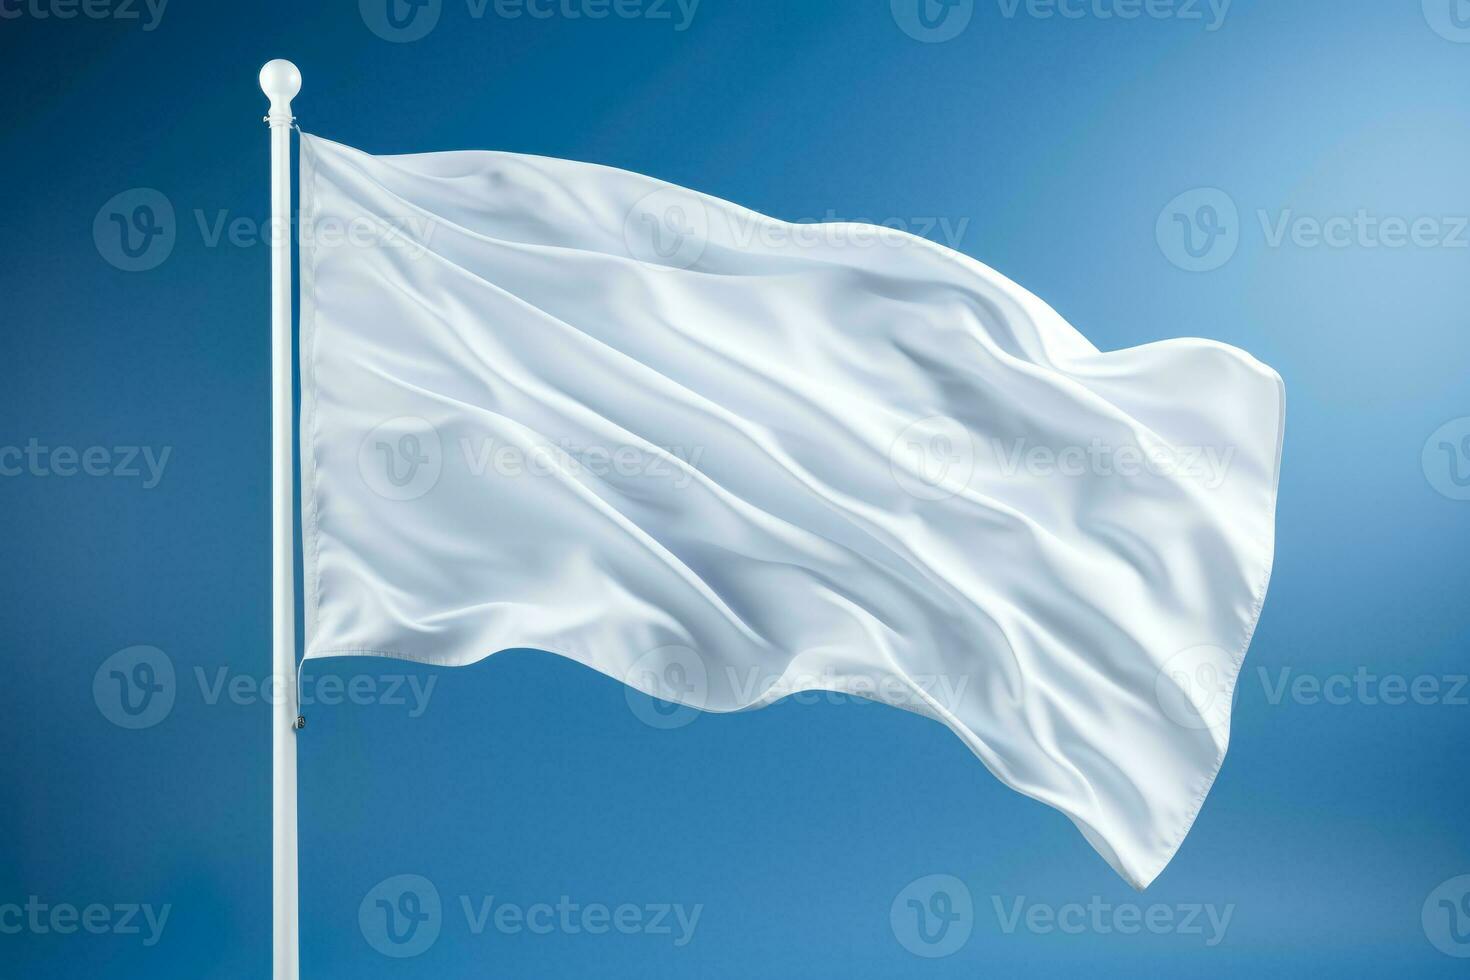 Historical white flag waved during ceremonies isolated on a gradient background photo